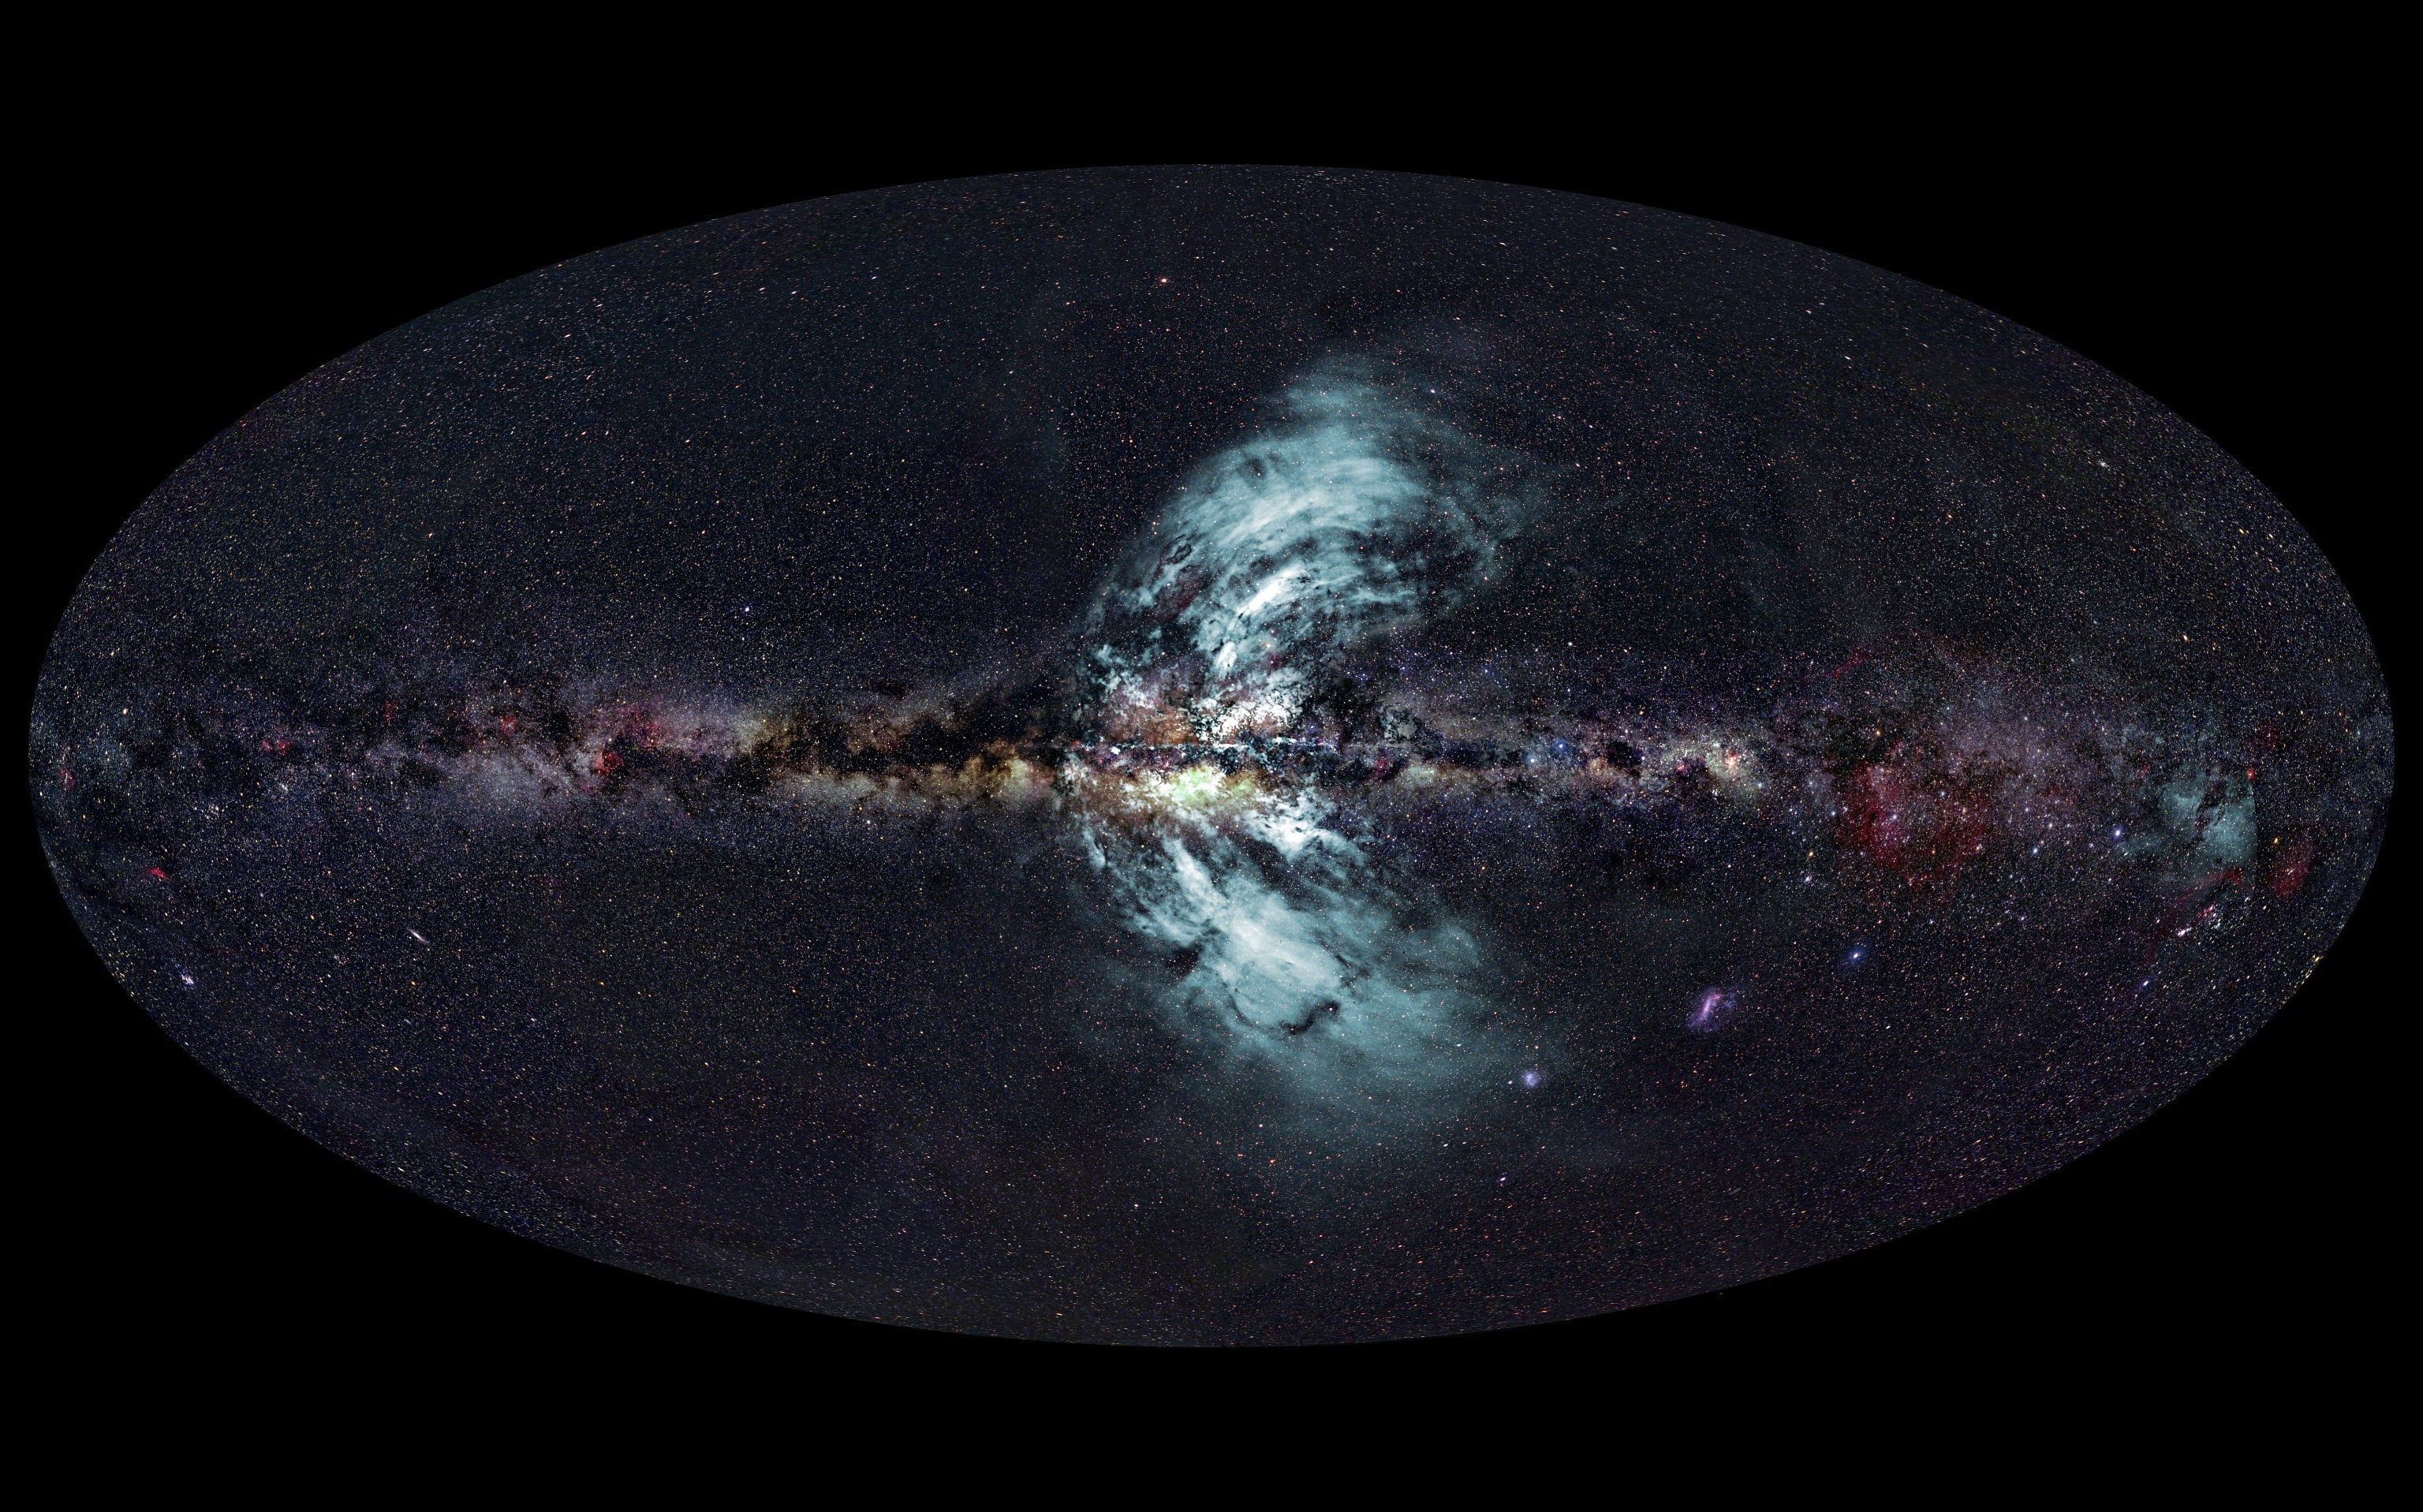 The new-found outflows of particles (pale blue) from the Galactic Centre. The background image is the whole Milky Way at the same scale. The curvature of the outflows is real, not a distortion caused by the imaging process. Credit: Radio image - E. Carretti (CSIRO); Radio data - S-PASS team; Optical image - A. Mellinger (Central Michigan University); Image composition, E. Bressert (CSIRO).